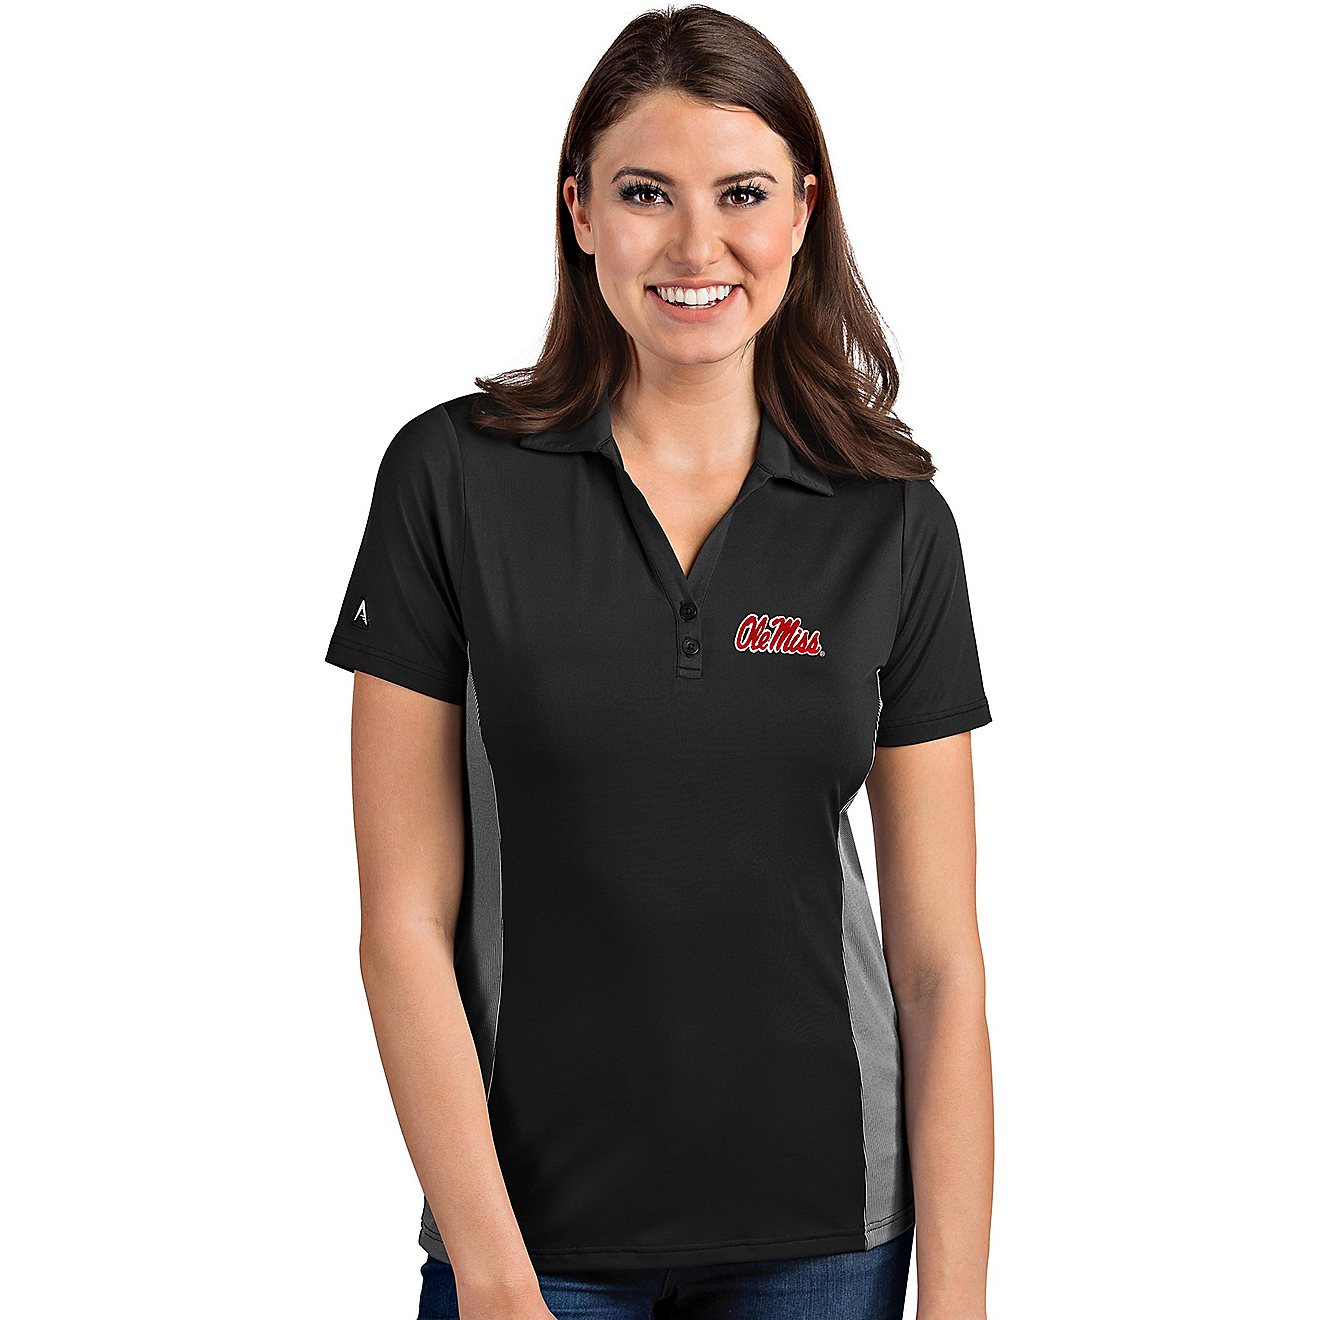 Antigua Women's University of Mississippi Venture Polo Shirt                                                                     - view number 1